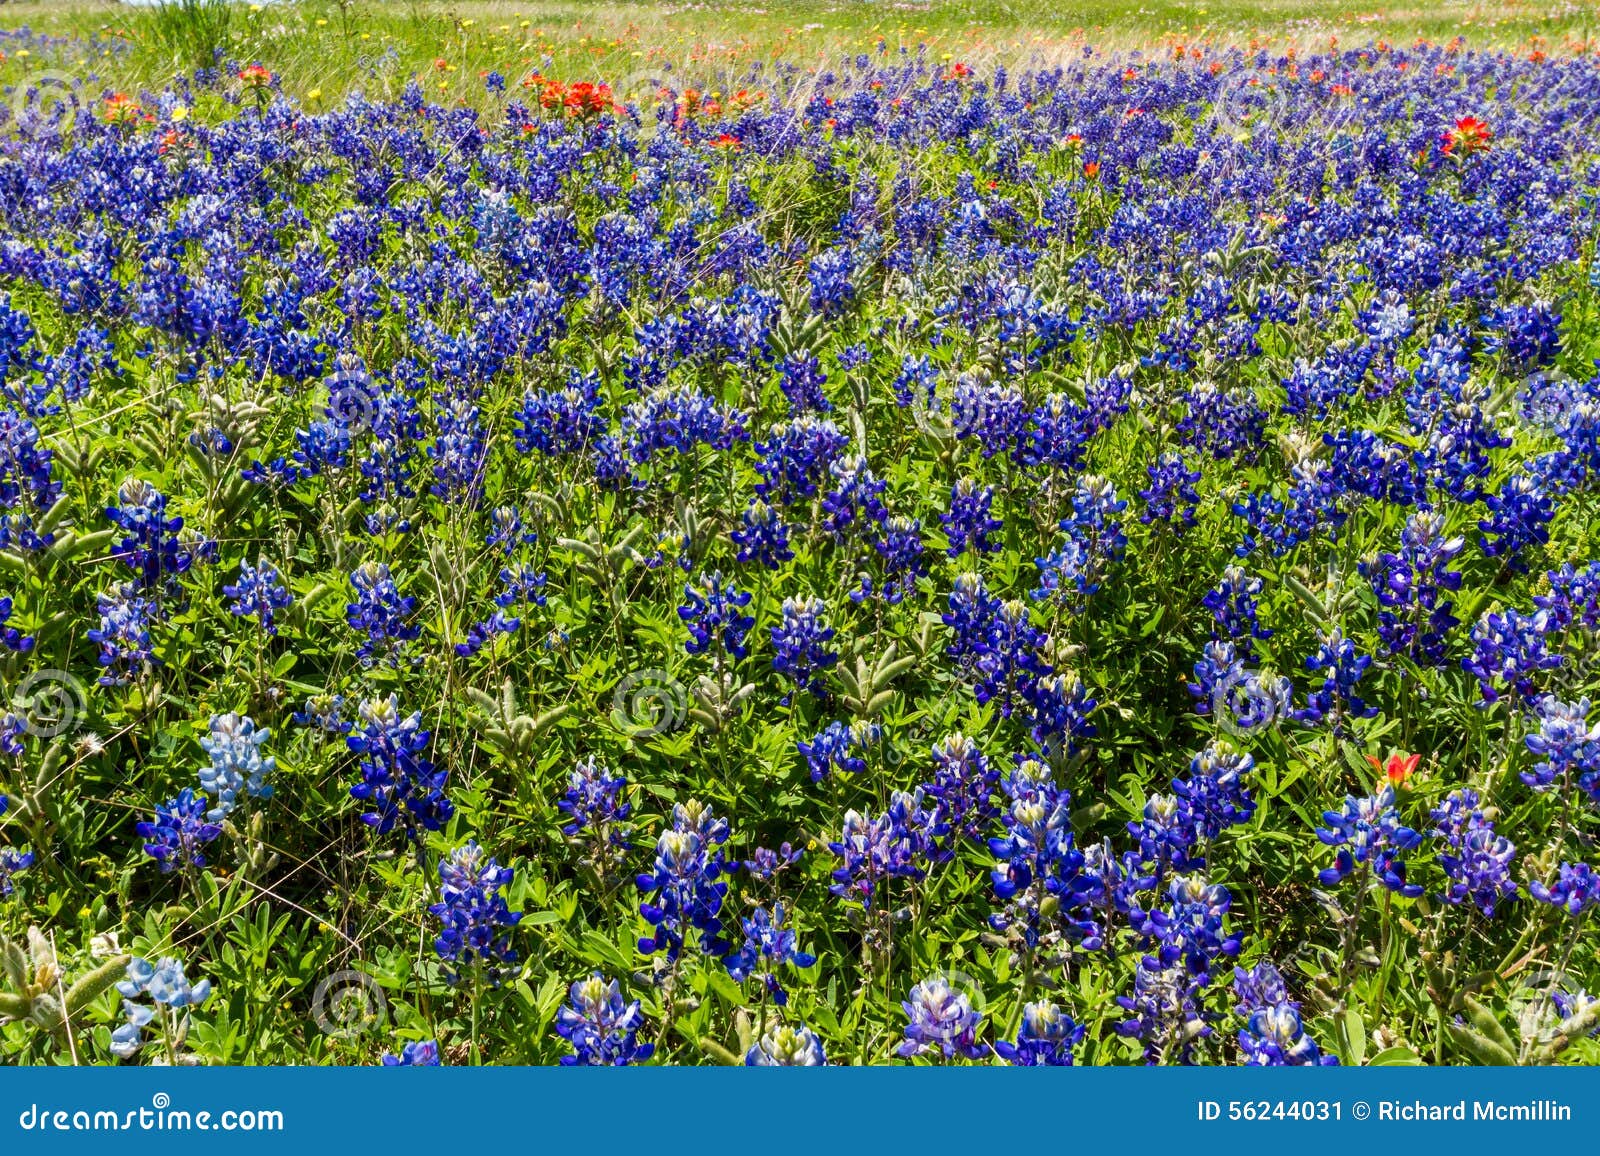 a beautiful field of the famous texas bluebonnet (lupinus texensis) wildflowers.